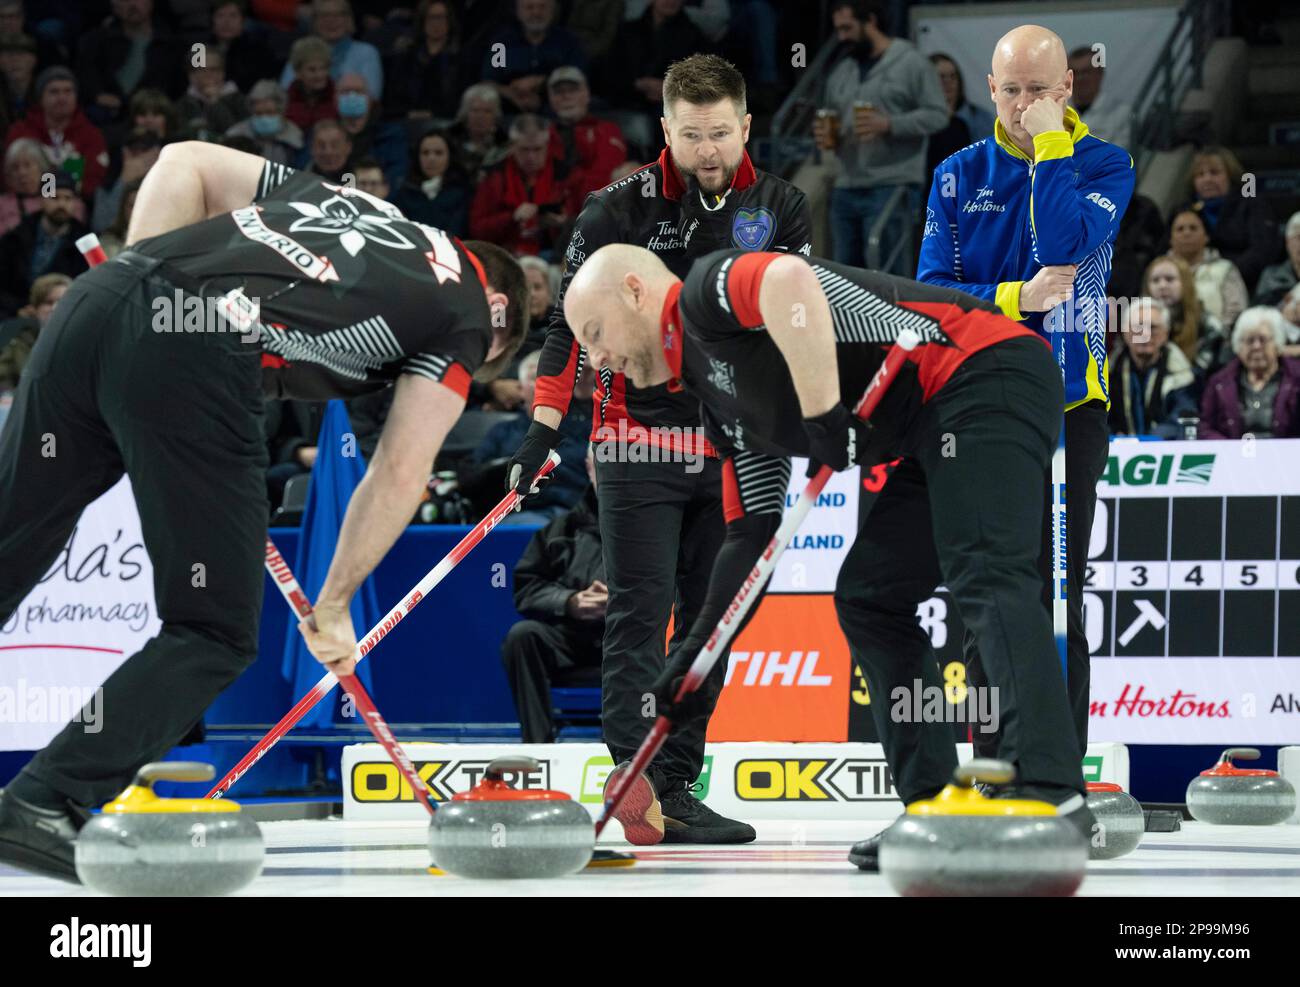 March 10, 2023, London, ON, Canada Ontario skip Mike McEwan (left back) and Alberta skip Kevin Koe (right back) watch as Ontario lead Joey Hart (left) and third Ryan Fry (right) sweep